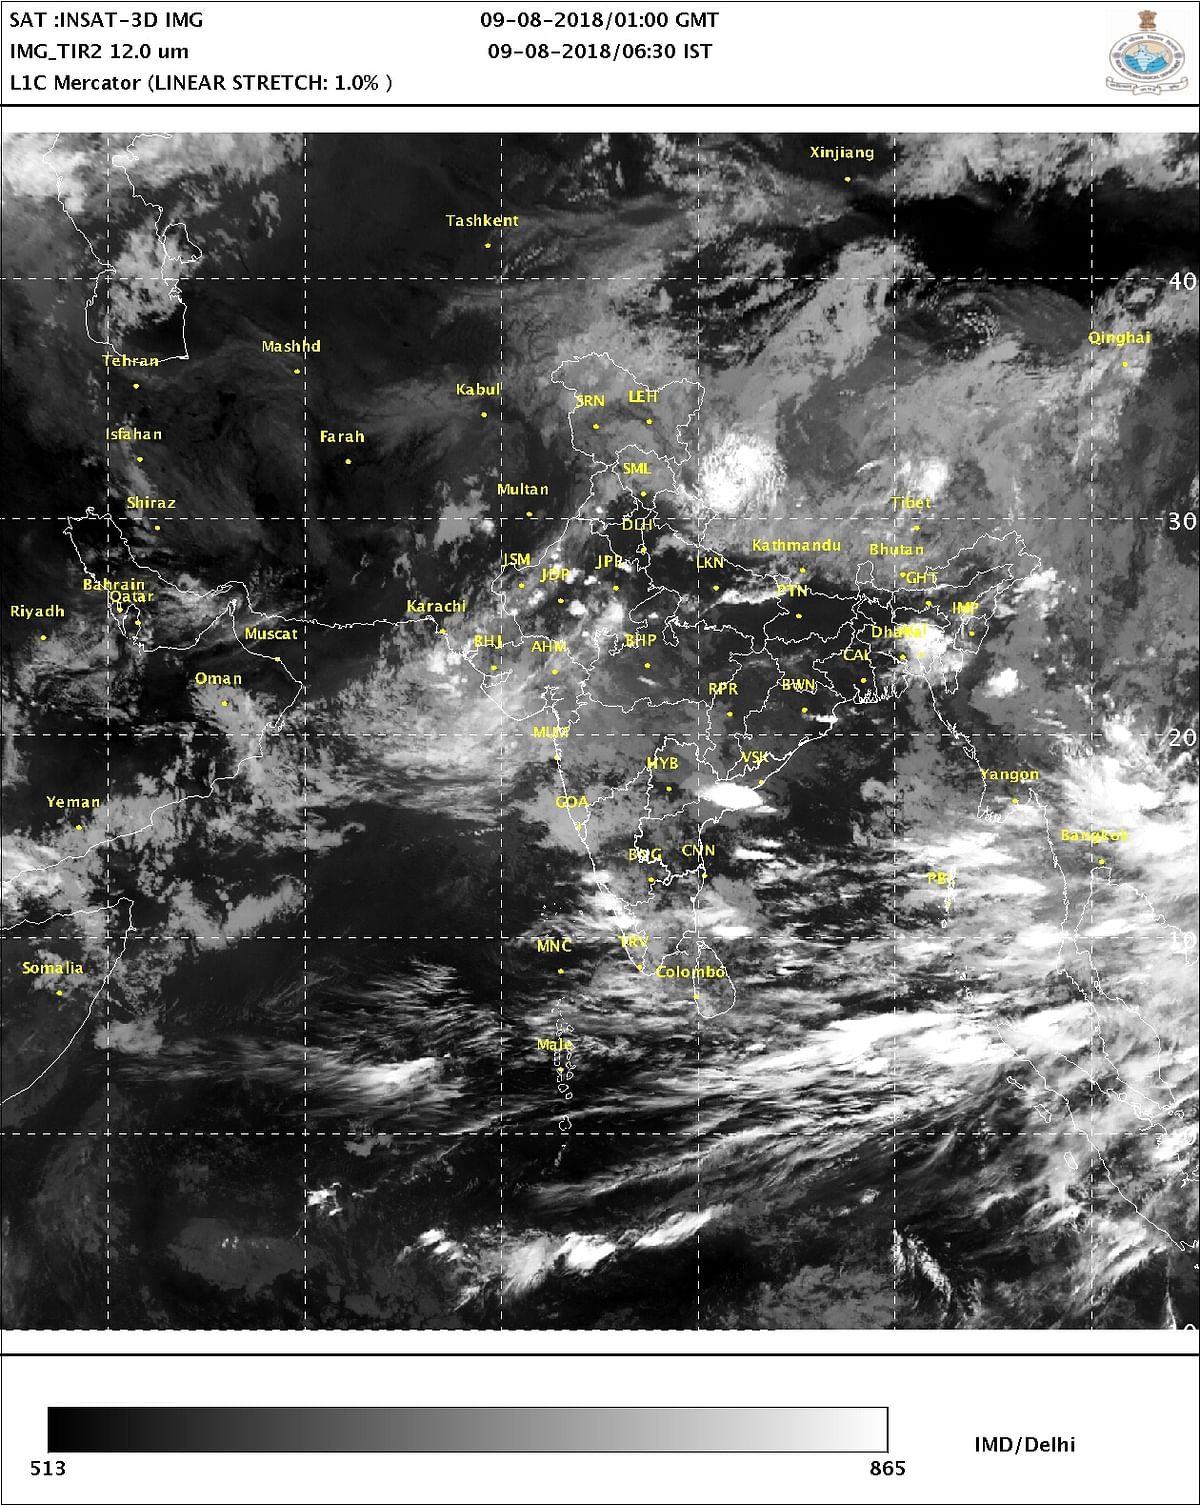 In Gujarat, particularly in Kutch region and Ahmedabad district, monsoon is yet to make its presence felt.